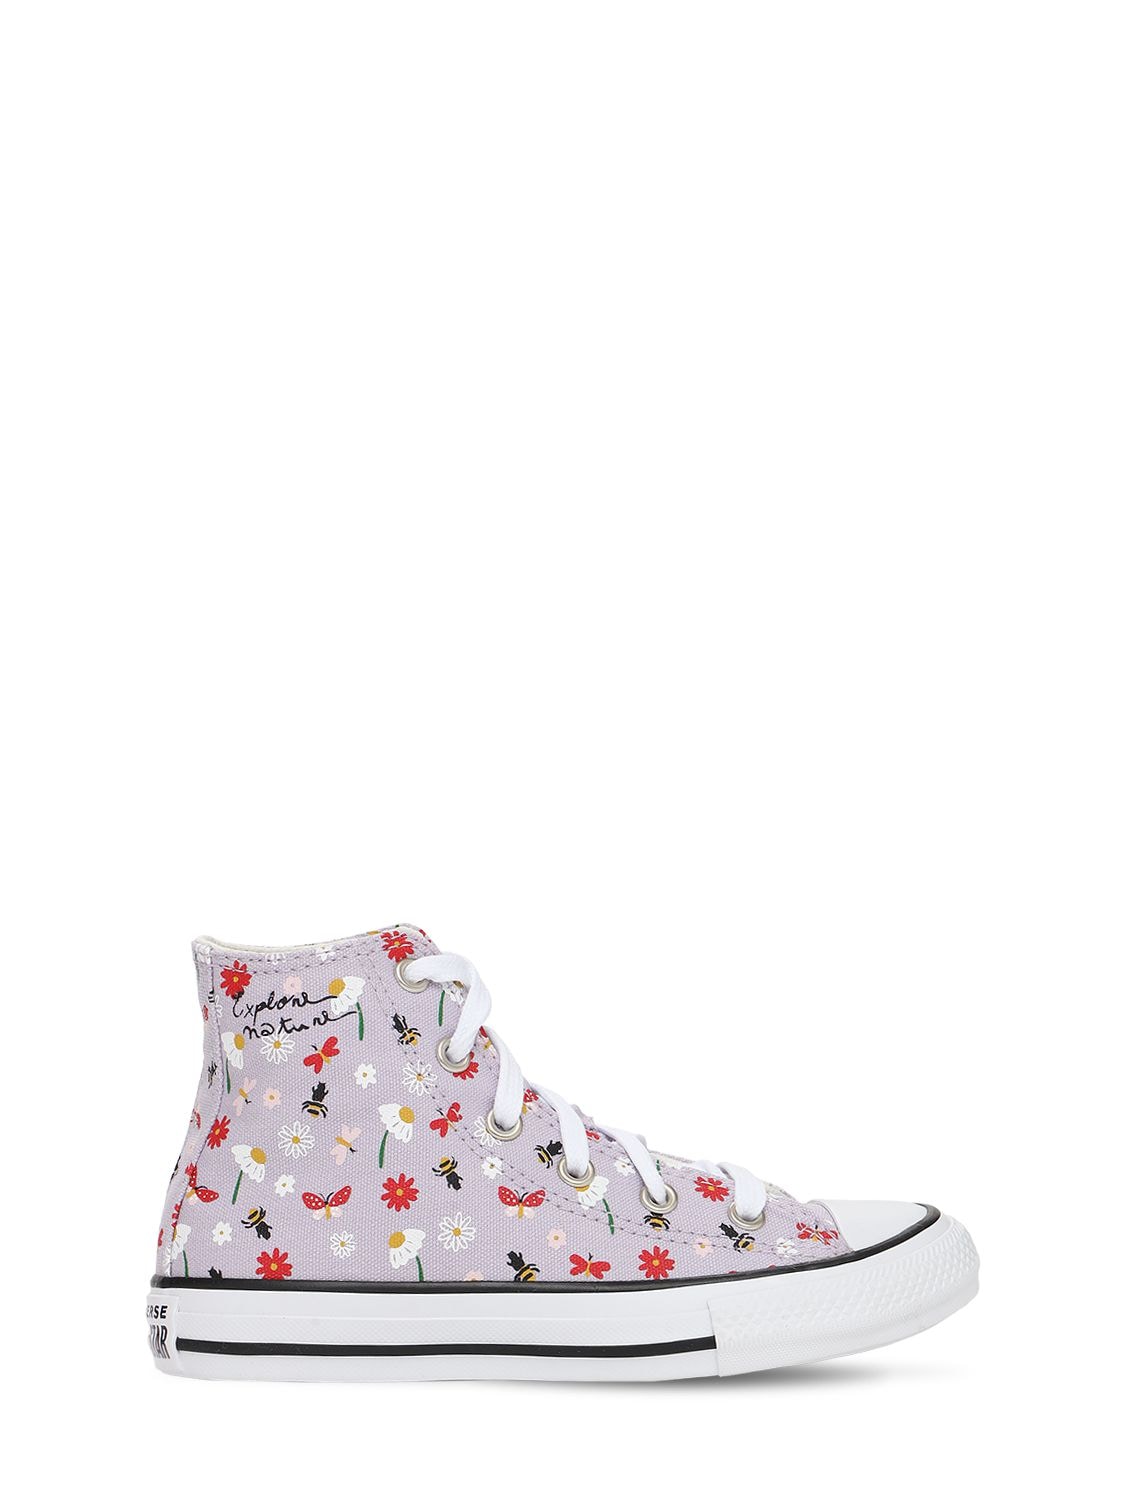 Converse Kids' Spring Print Chuck Taylor Sneakers In Light Purple